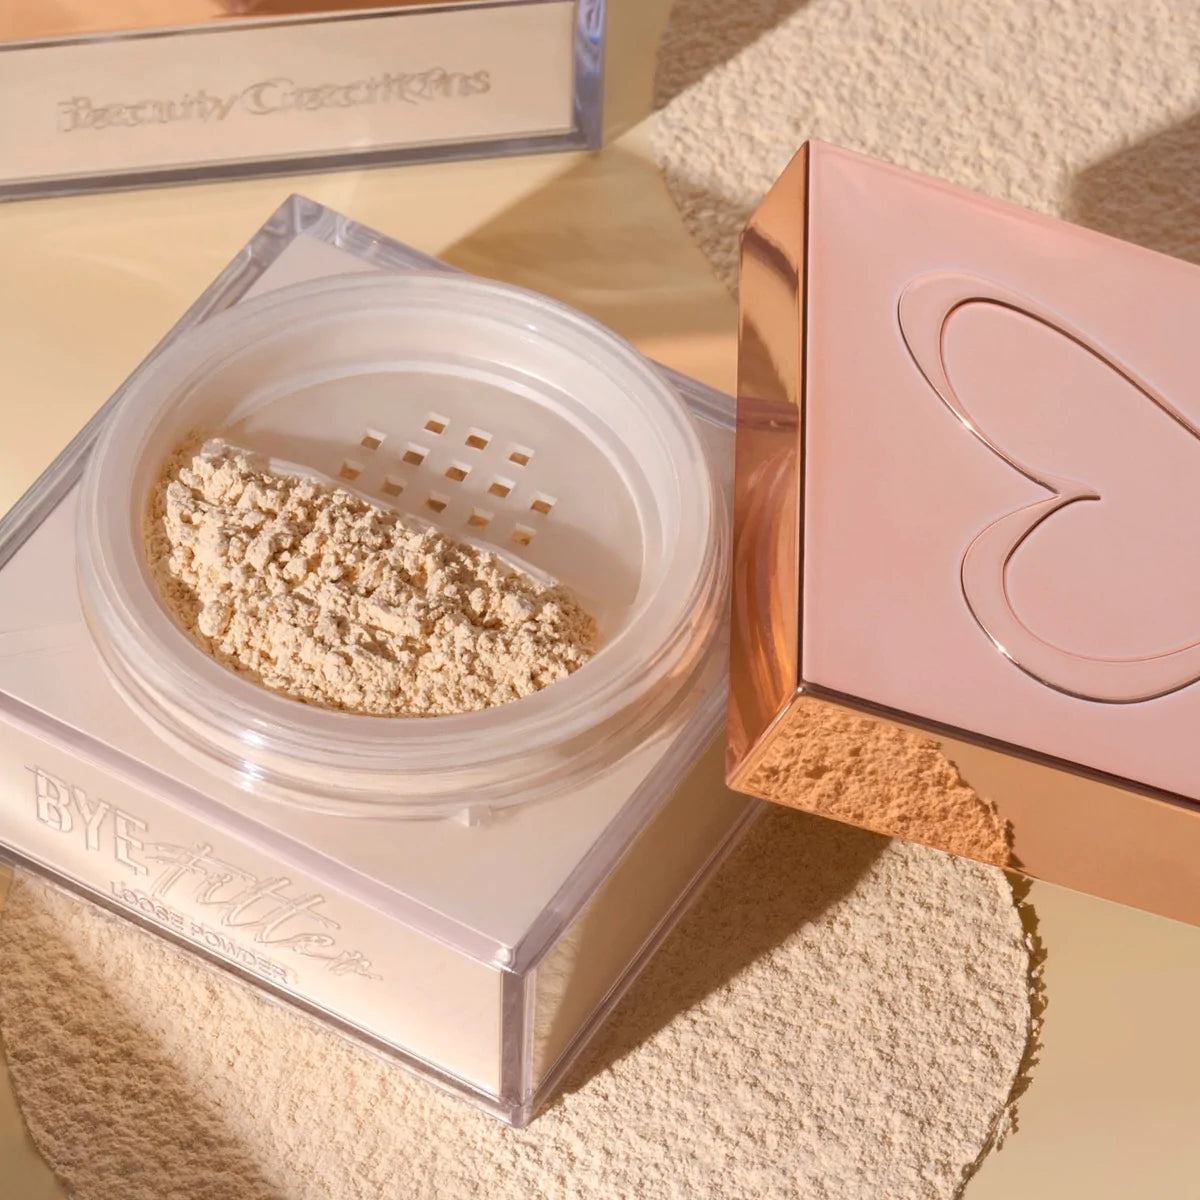 Beauty Creations - Bye Filter Loose Setting Powder Translucent Dream